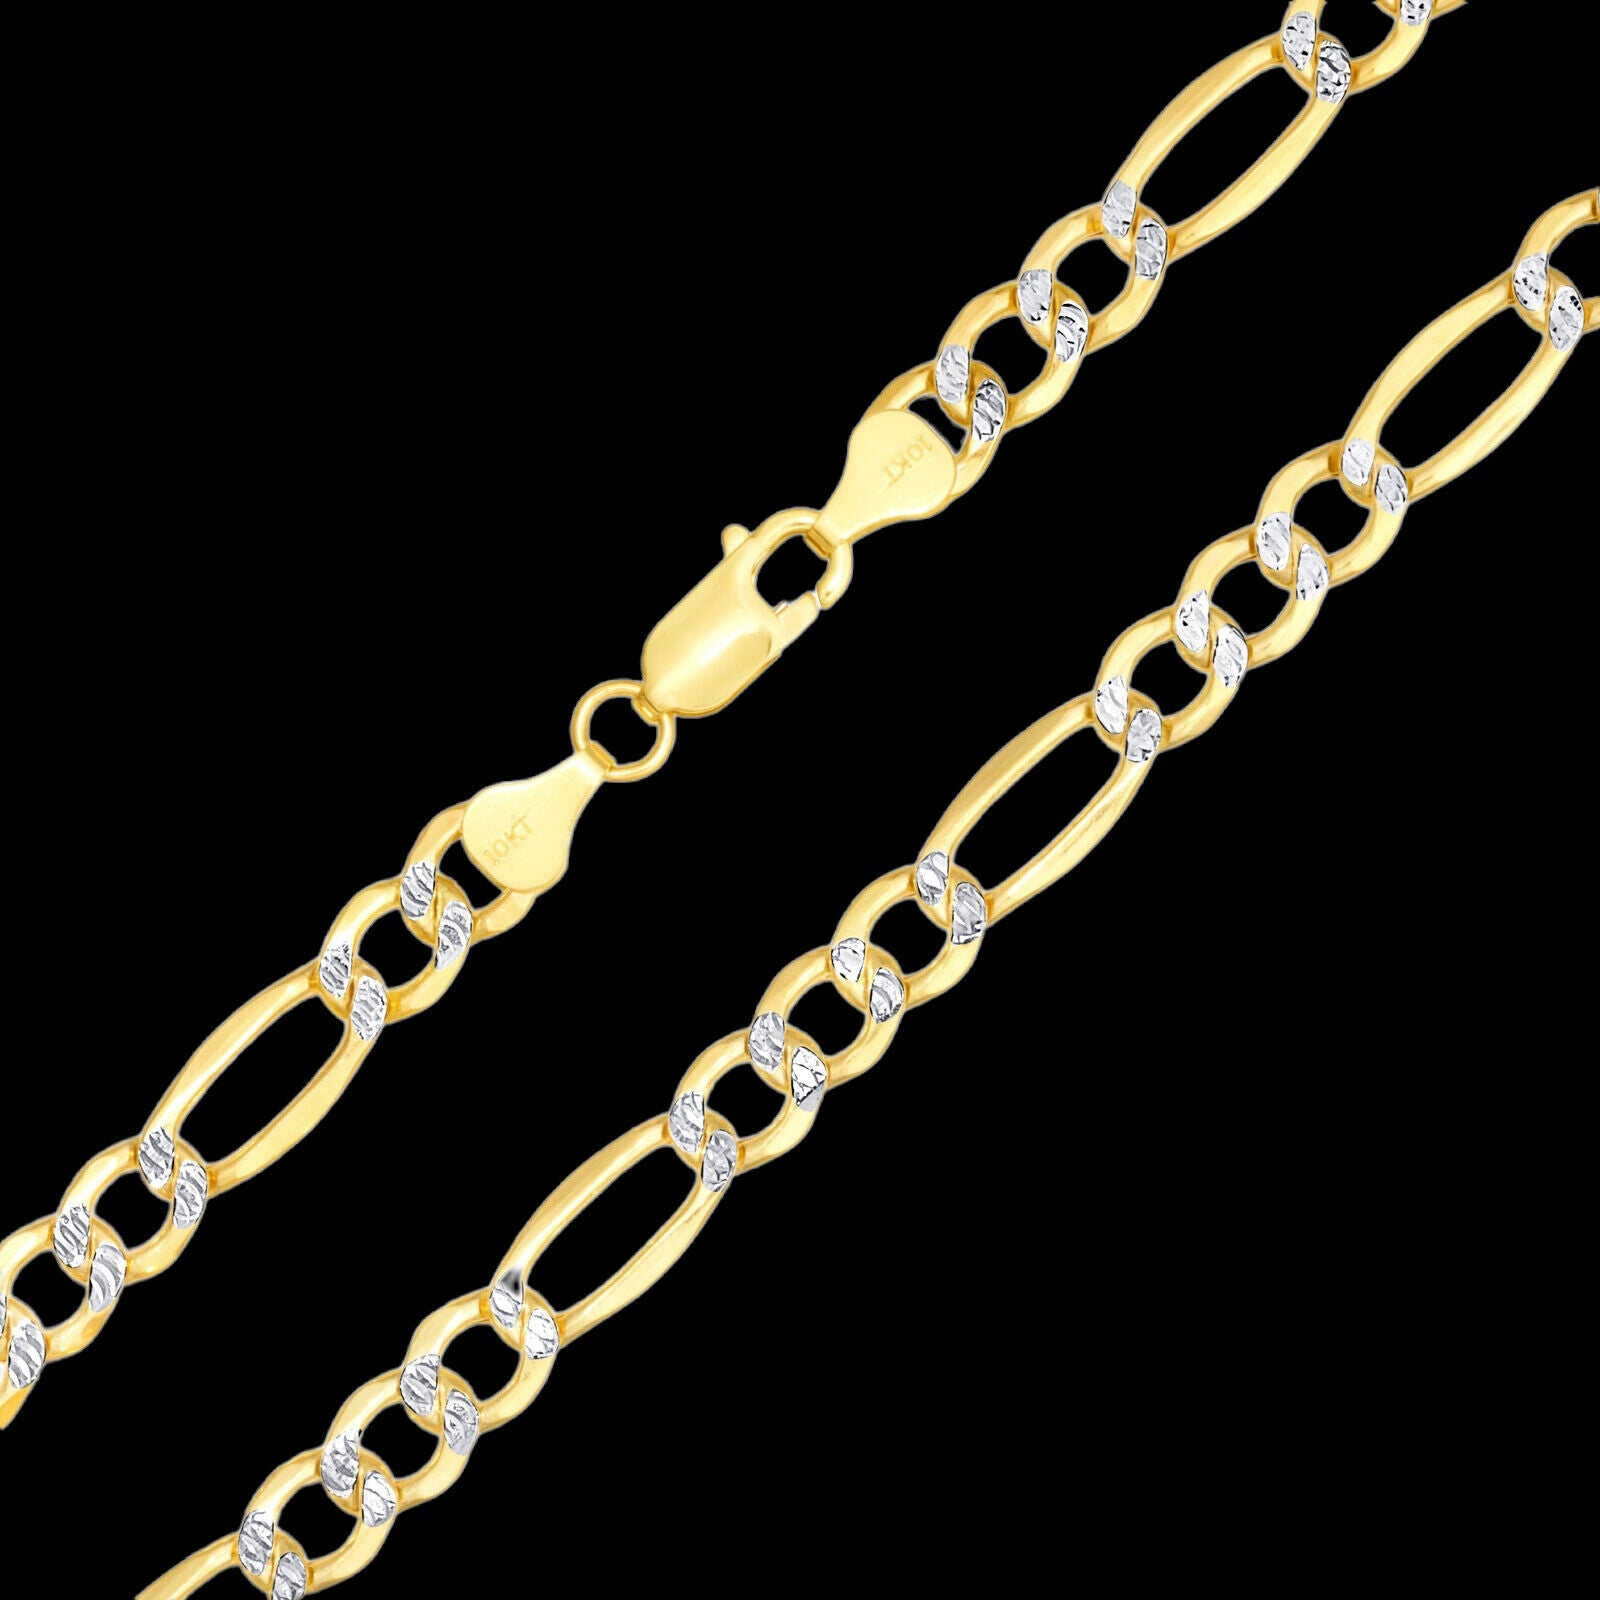 Real 10k Gold Chain Figaro Link Necklace 3.5mm-9mm, Men Women 18